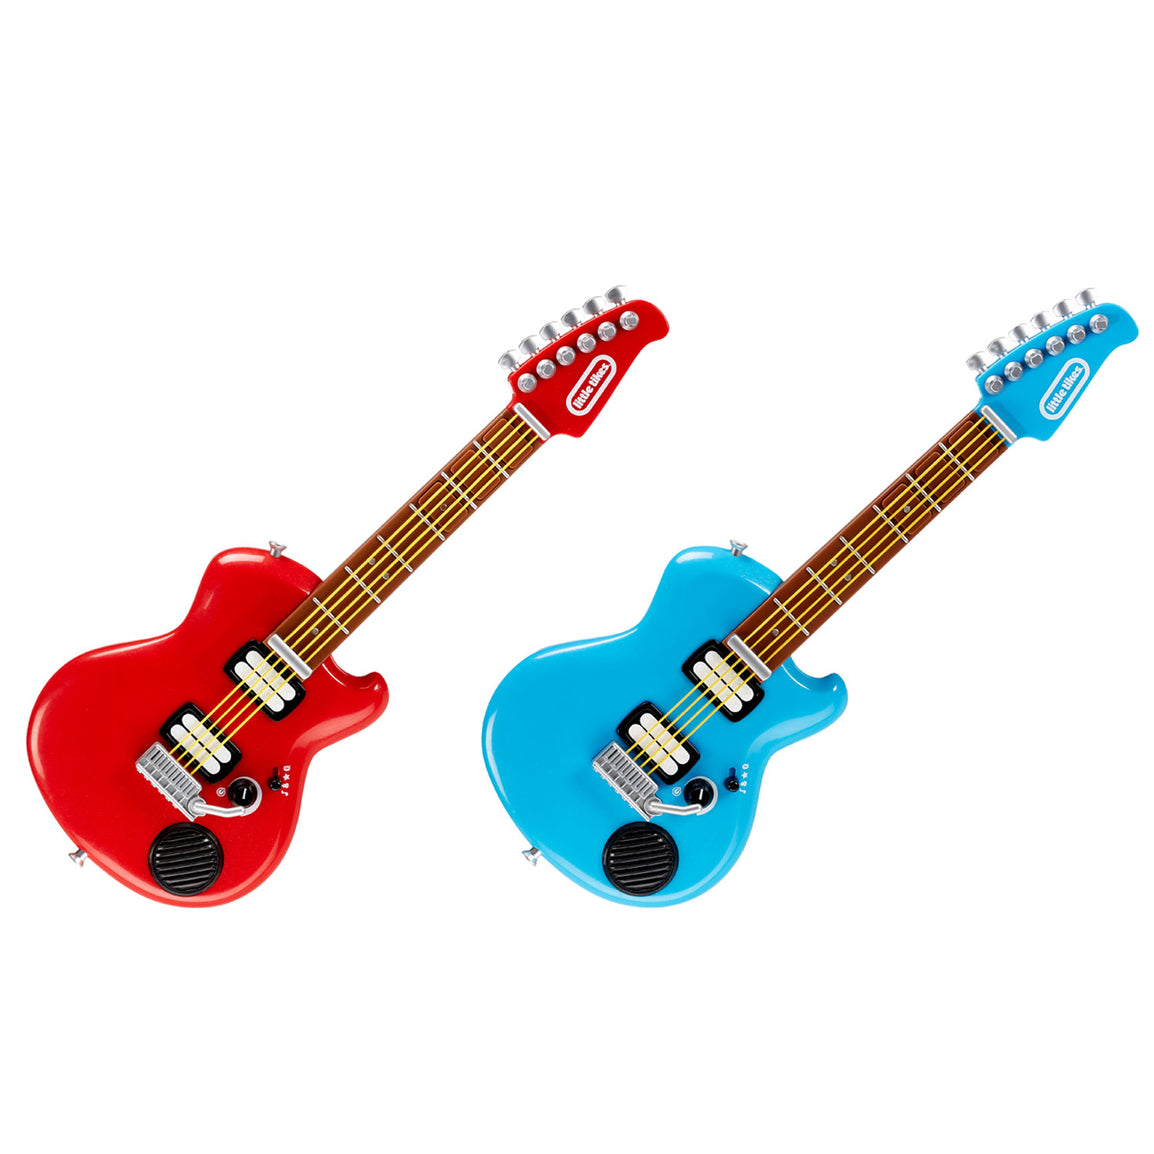 My Real Jam™ Twice the Fun Guitars - 2 Electric Guitars - Official Little Tikes Website